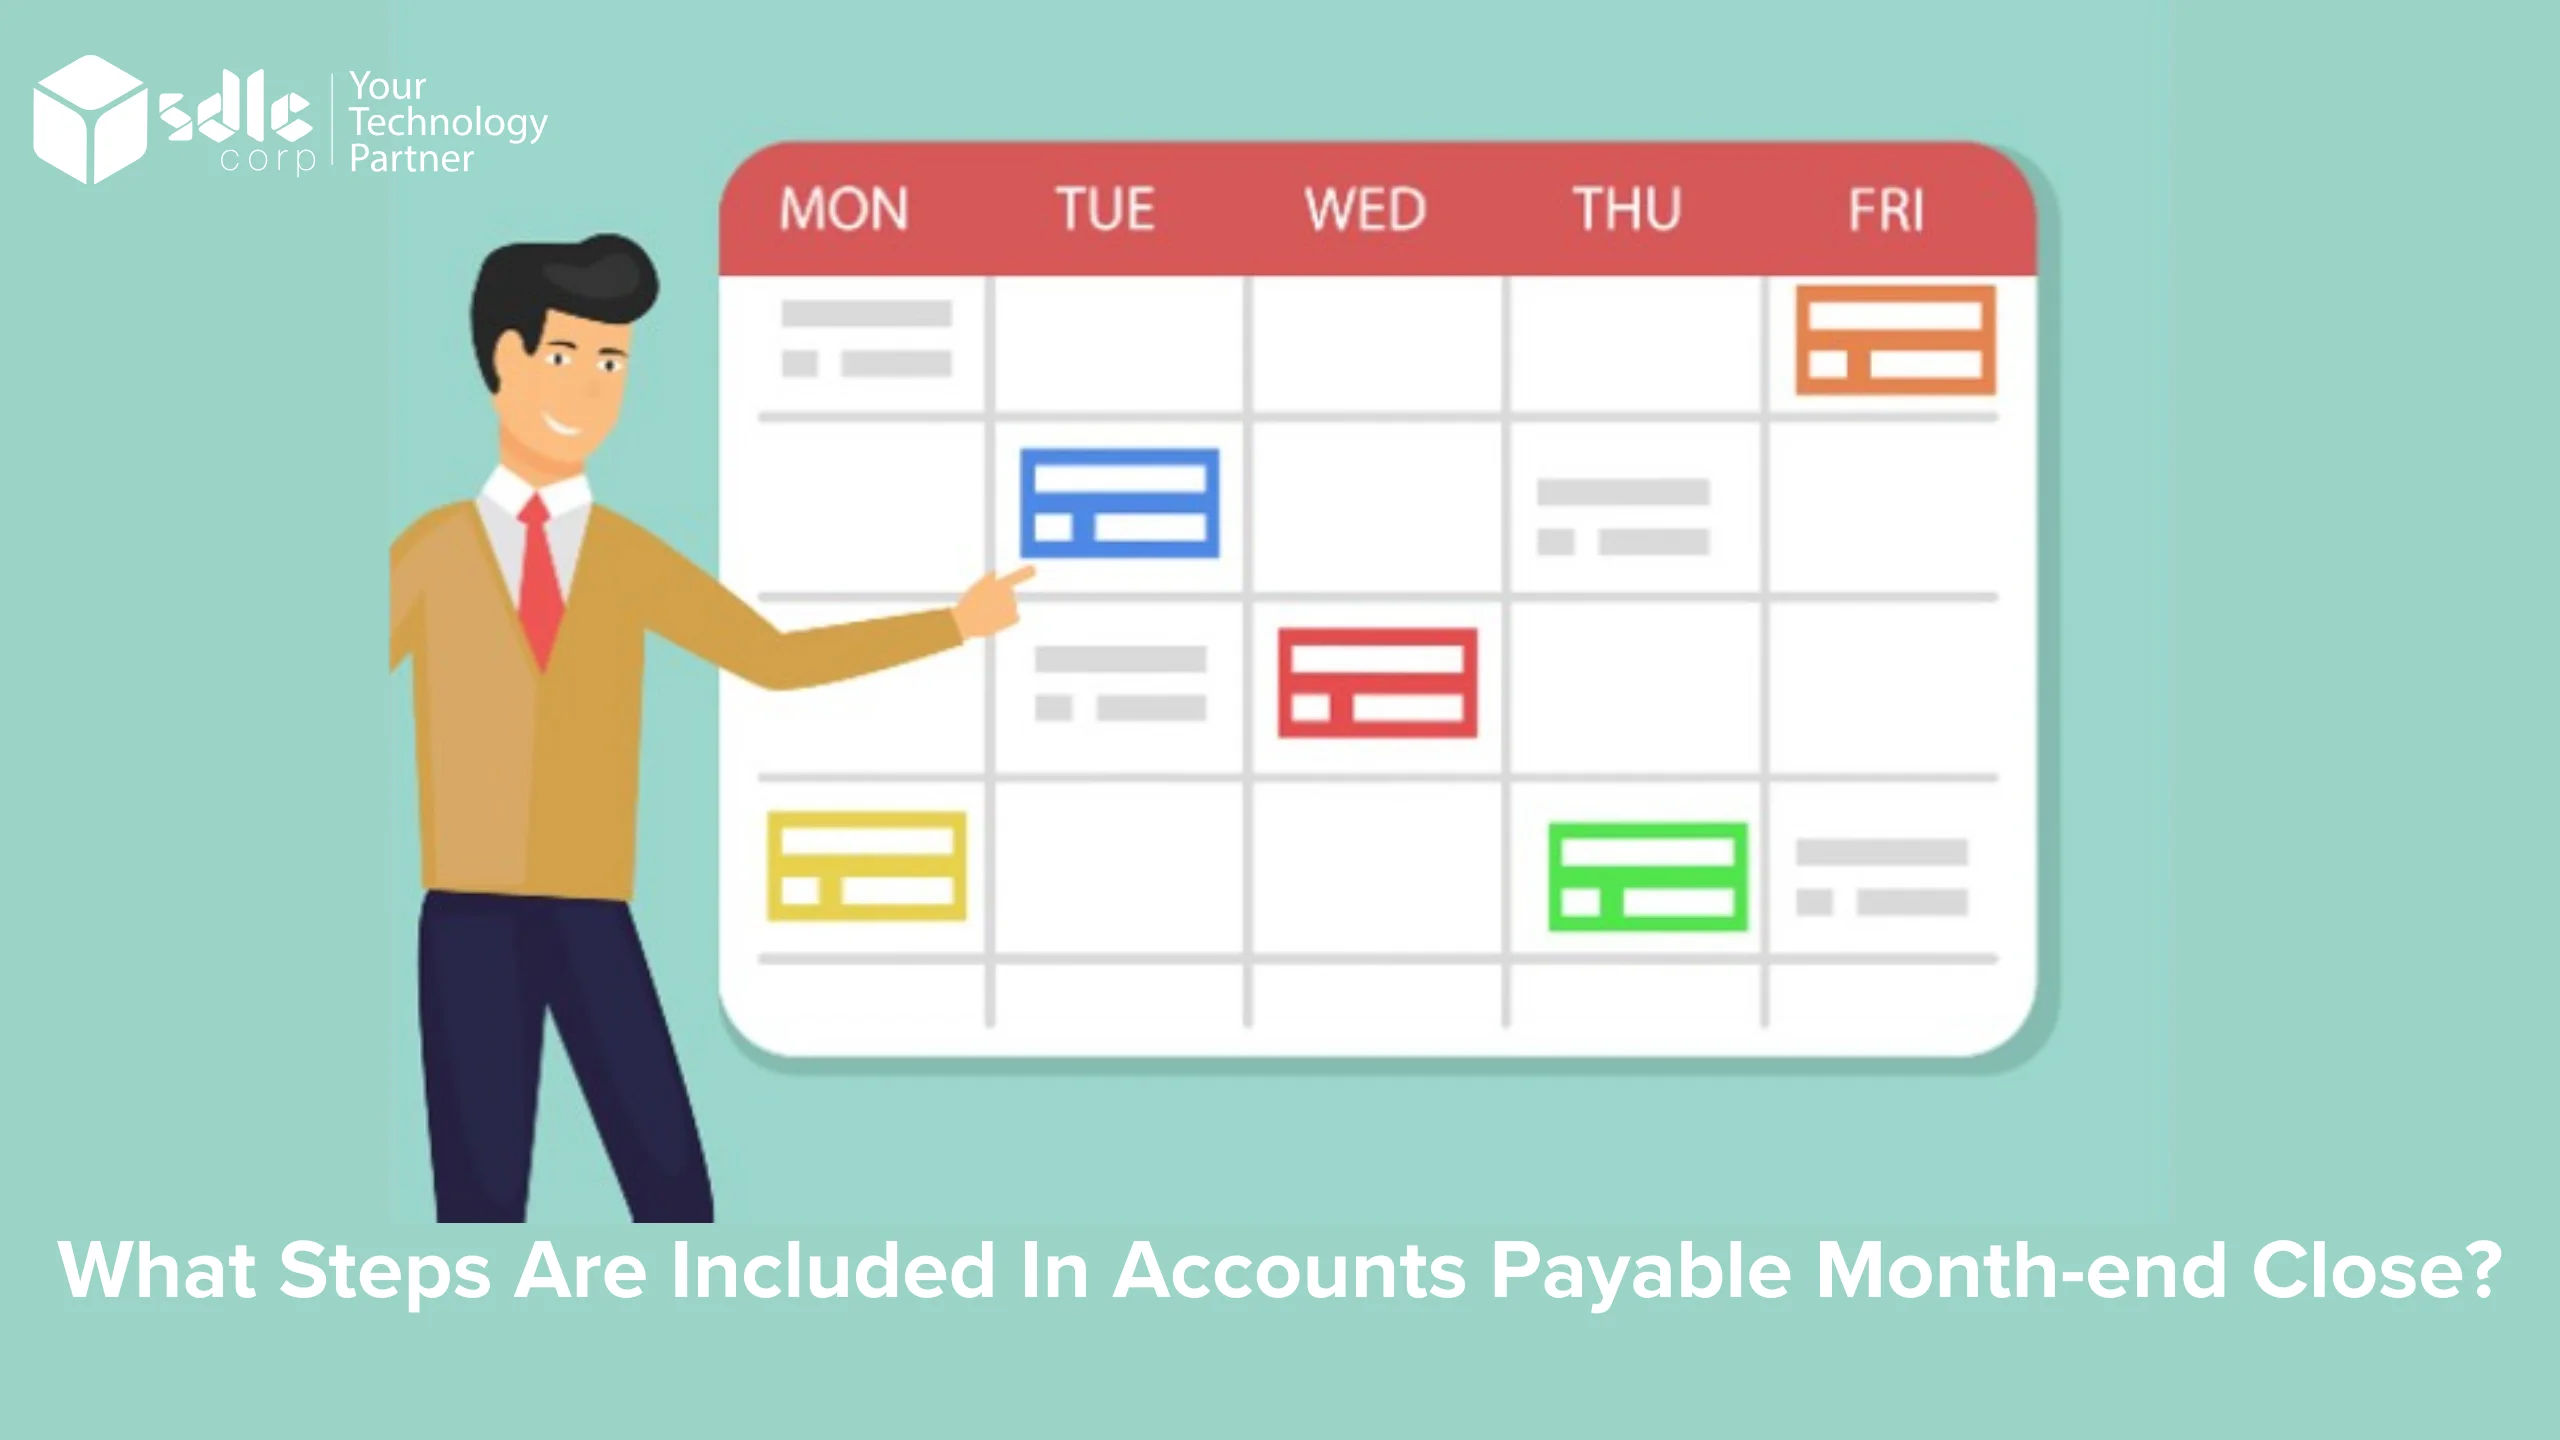 What Steps Are Included in Accounts Payable Month-End Close